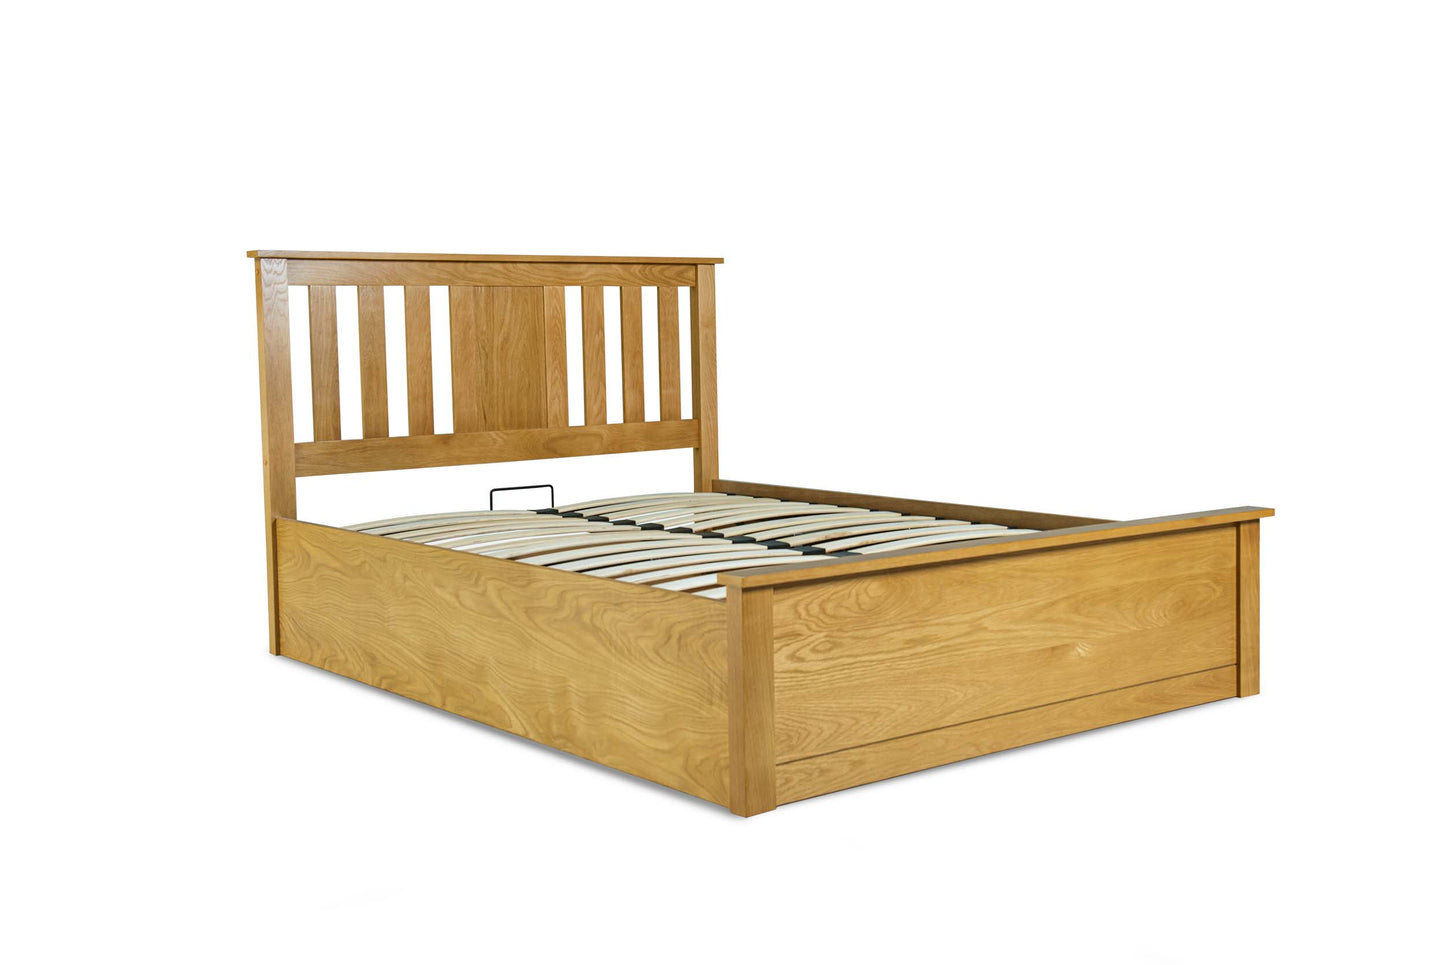 Chesterfield Ottoman Storage Bed Frame - 4ft6 Double - Natural Oak